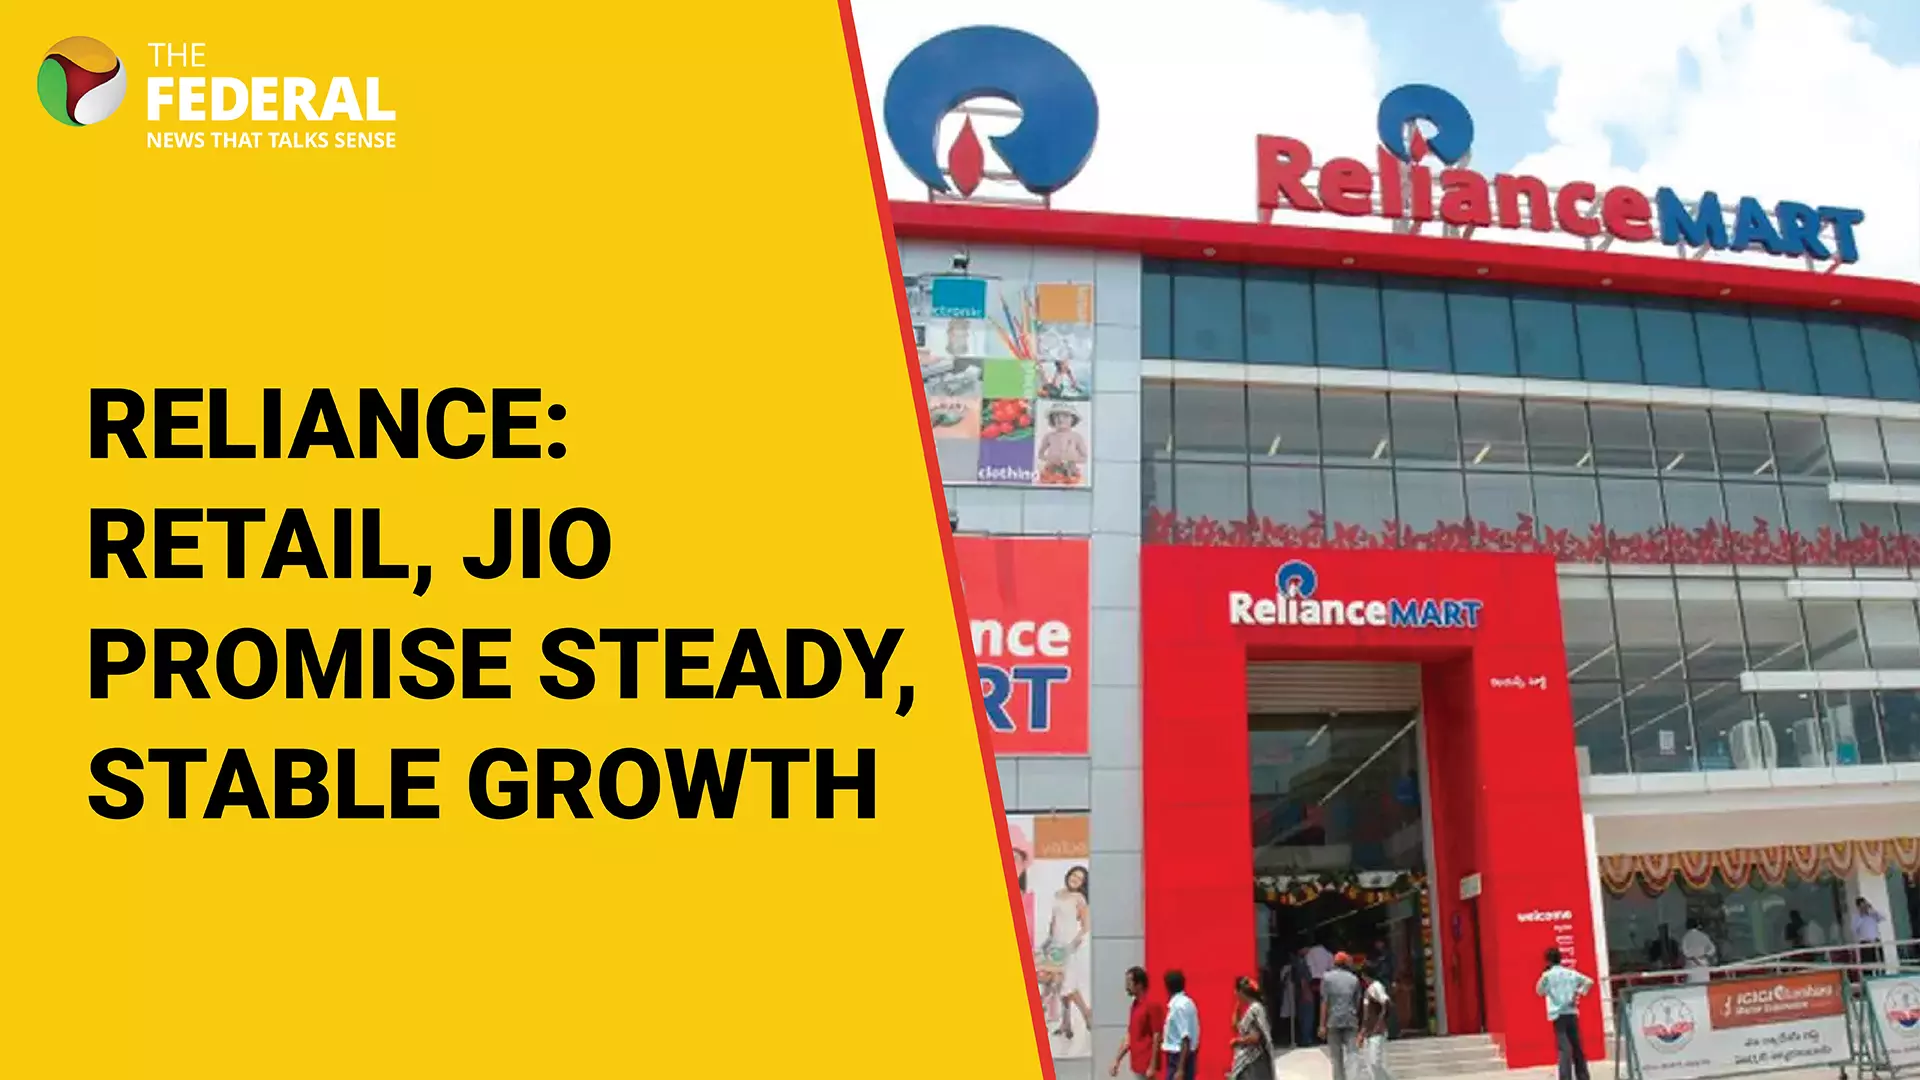 Reliance: Retail, Jio promise steady, stable growth